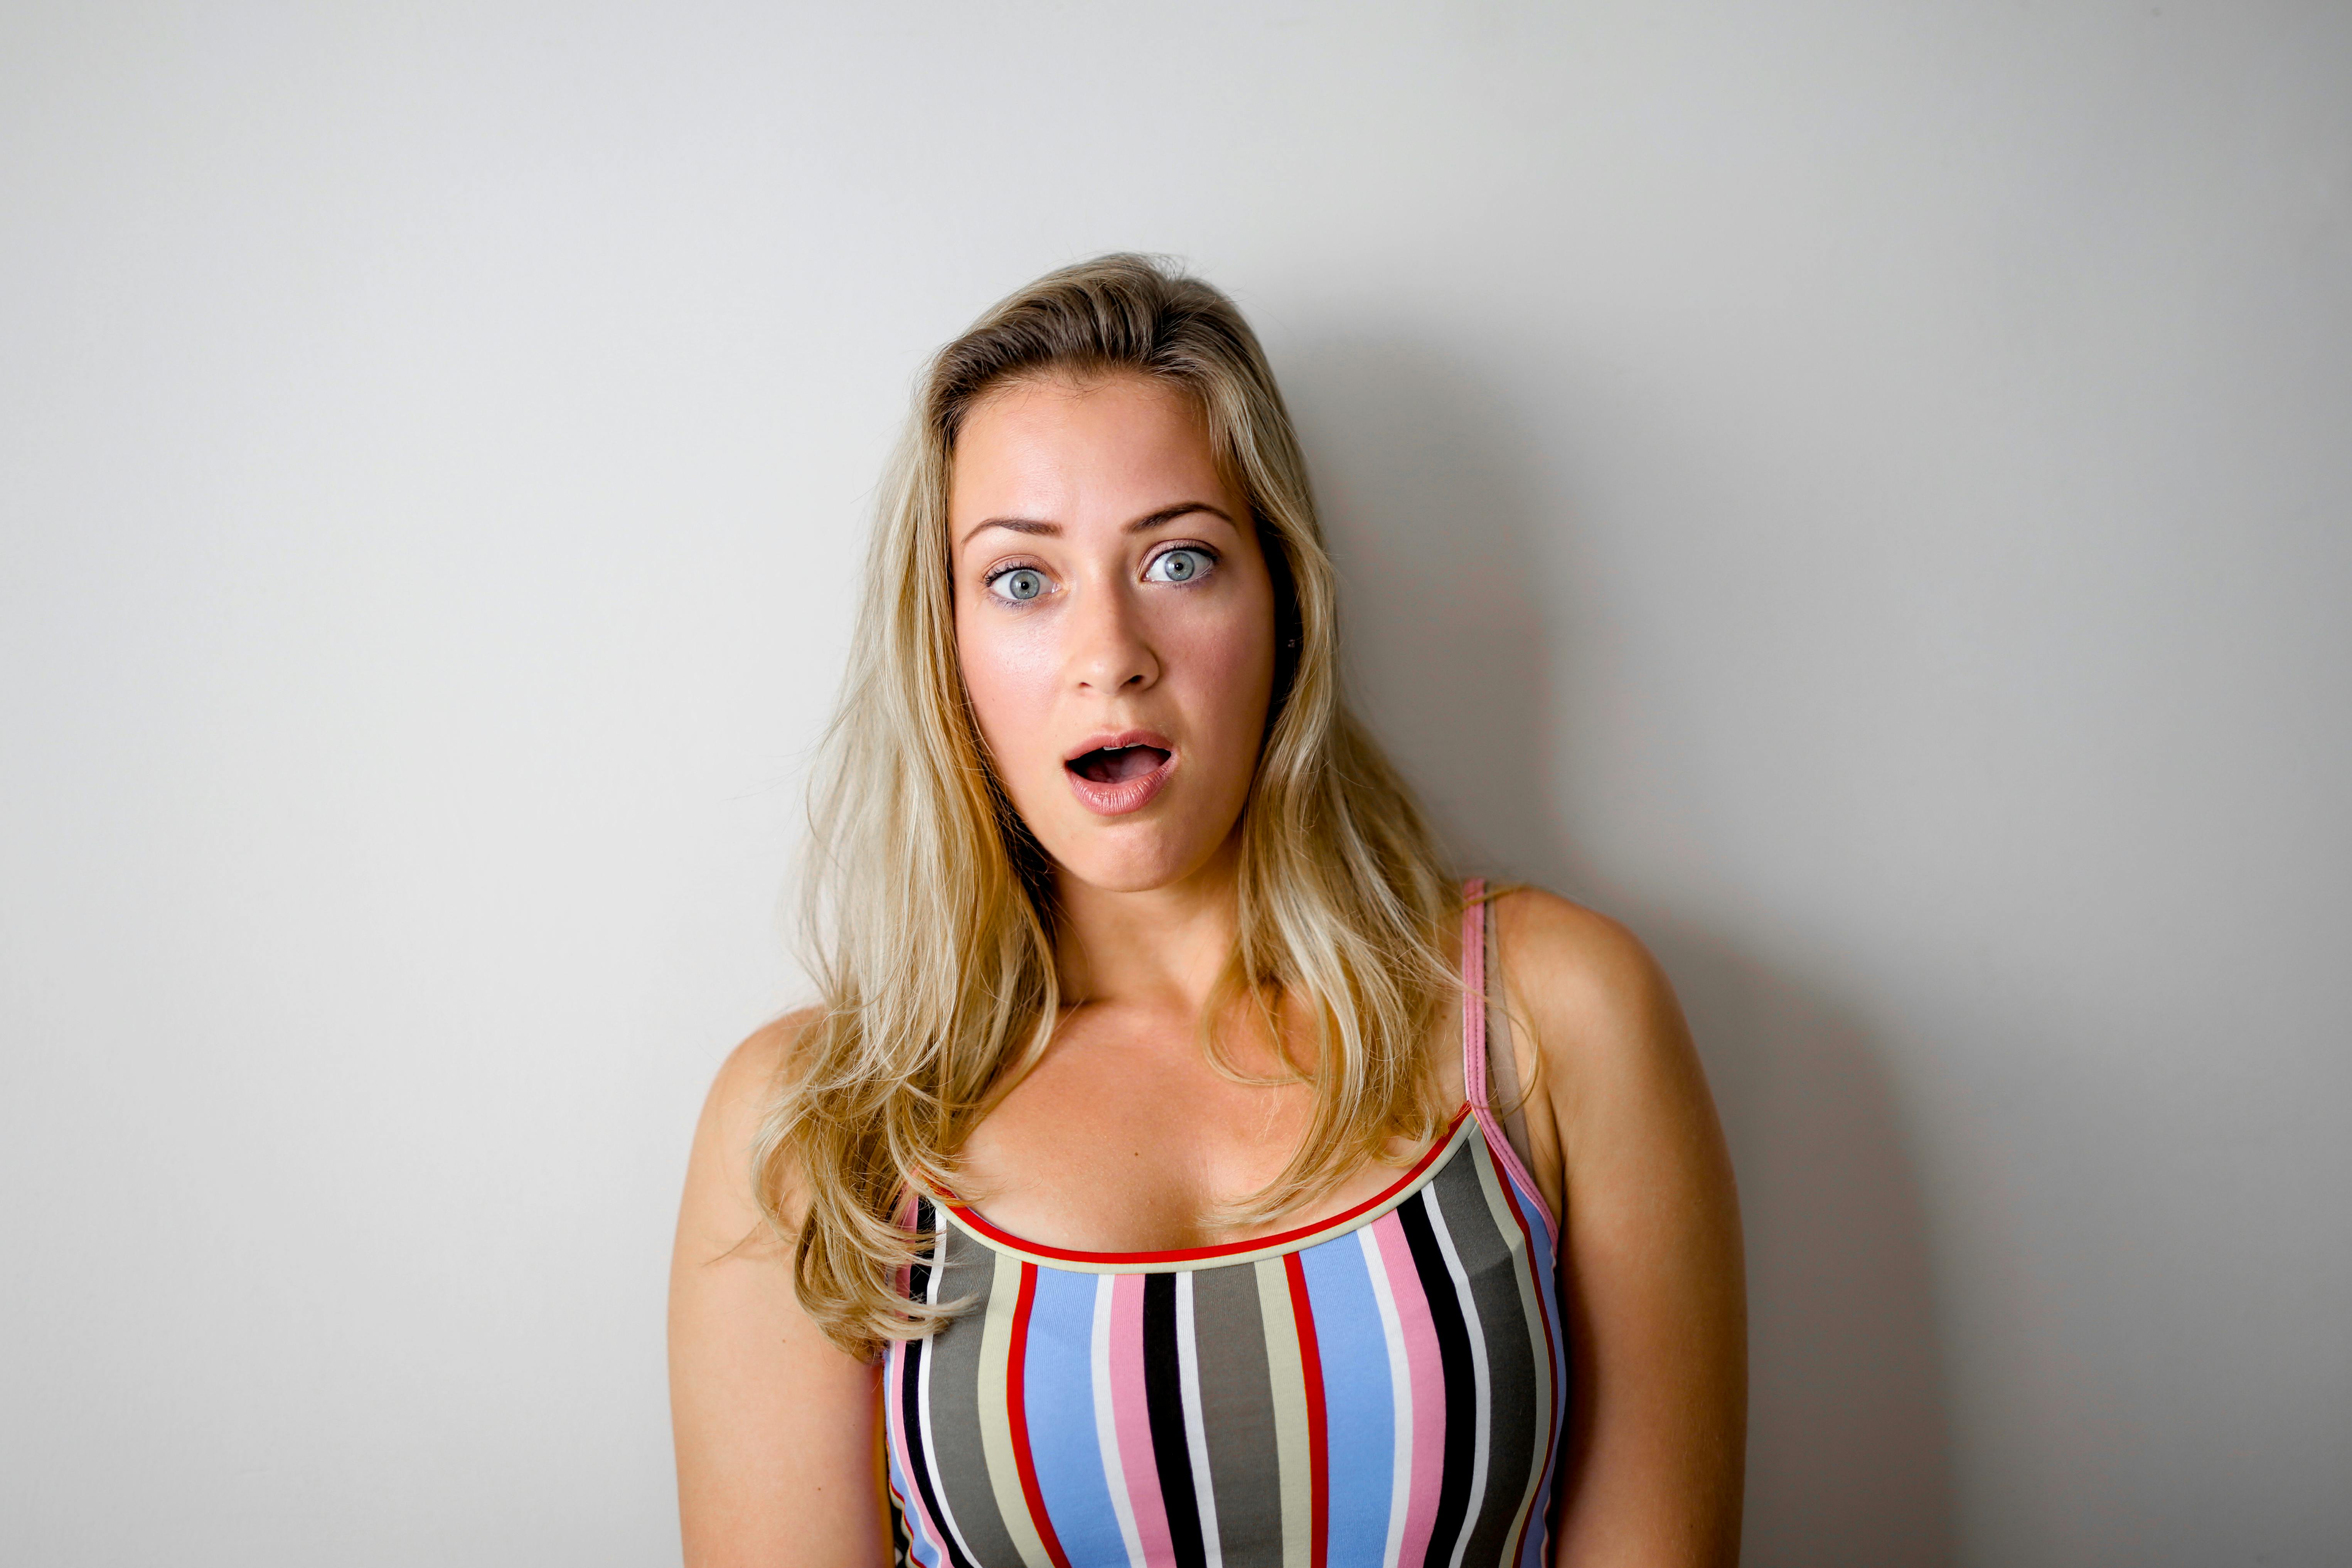 A shocked woman | Source: Pexels